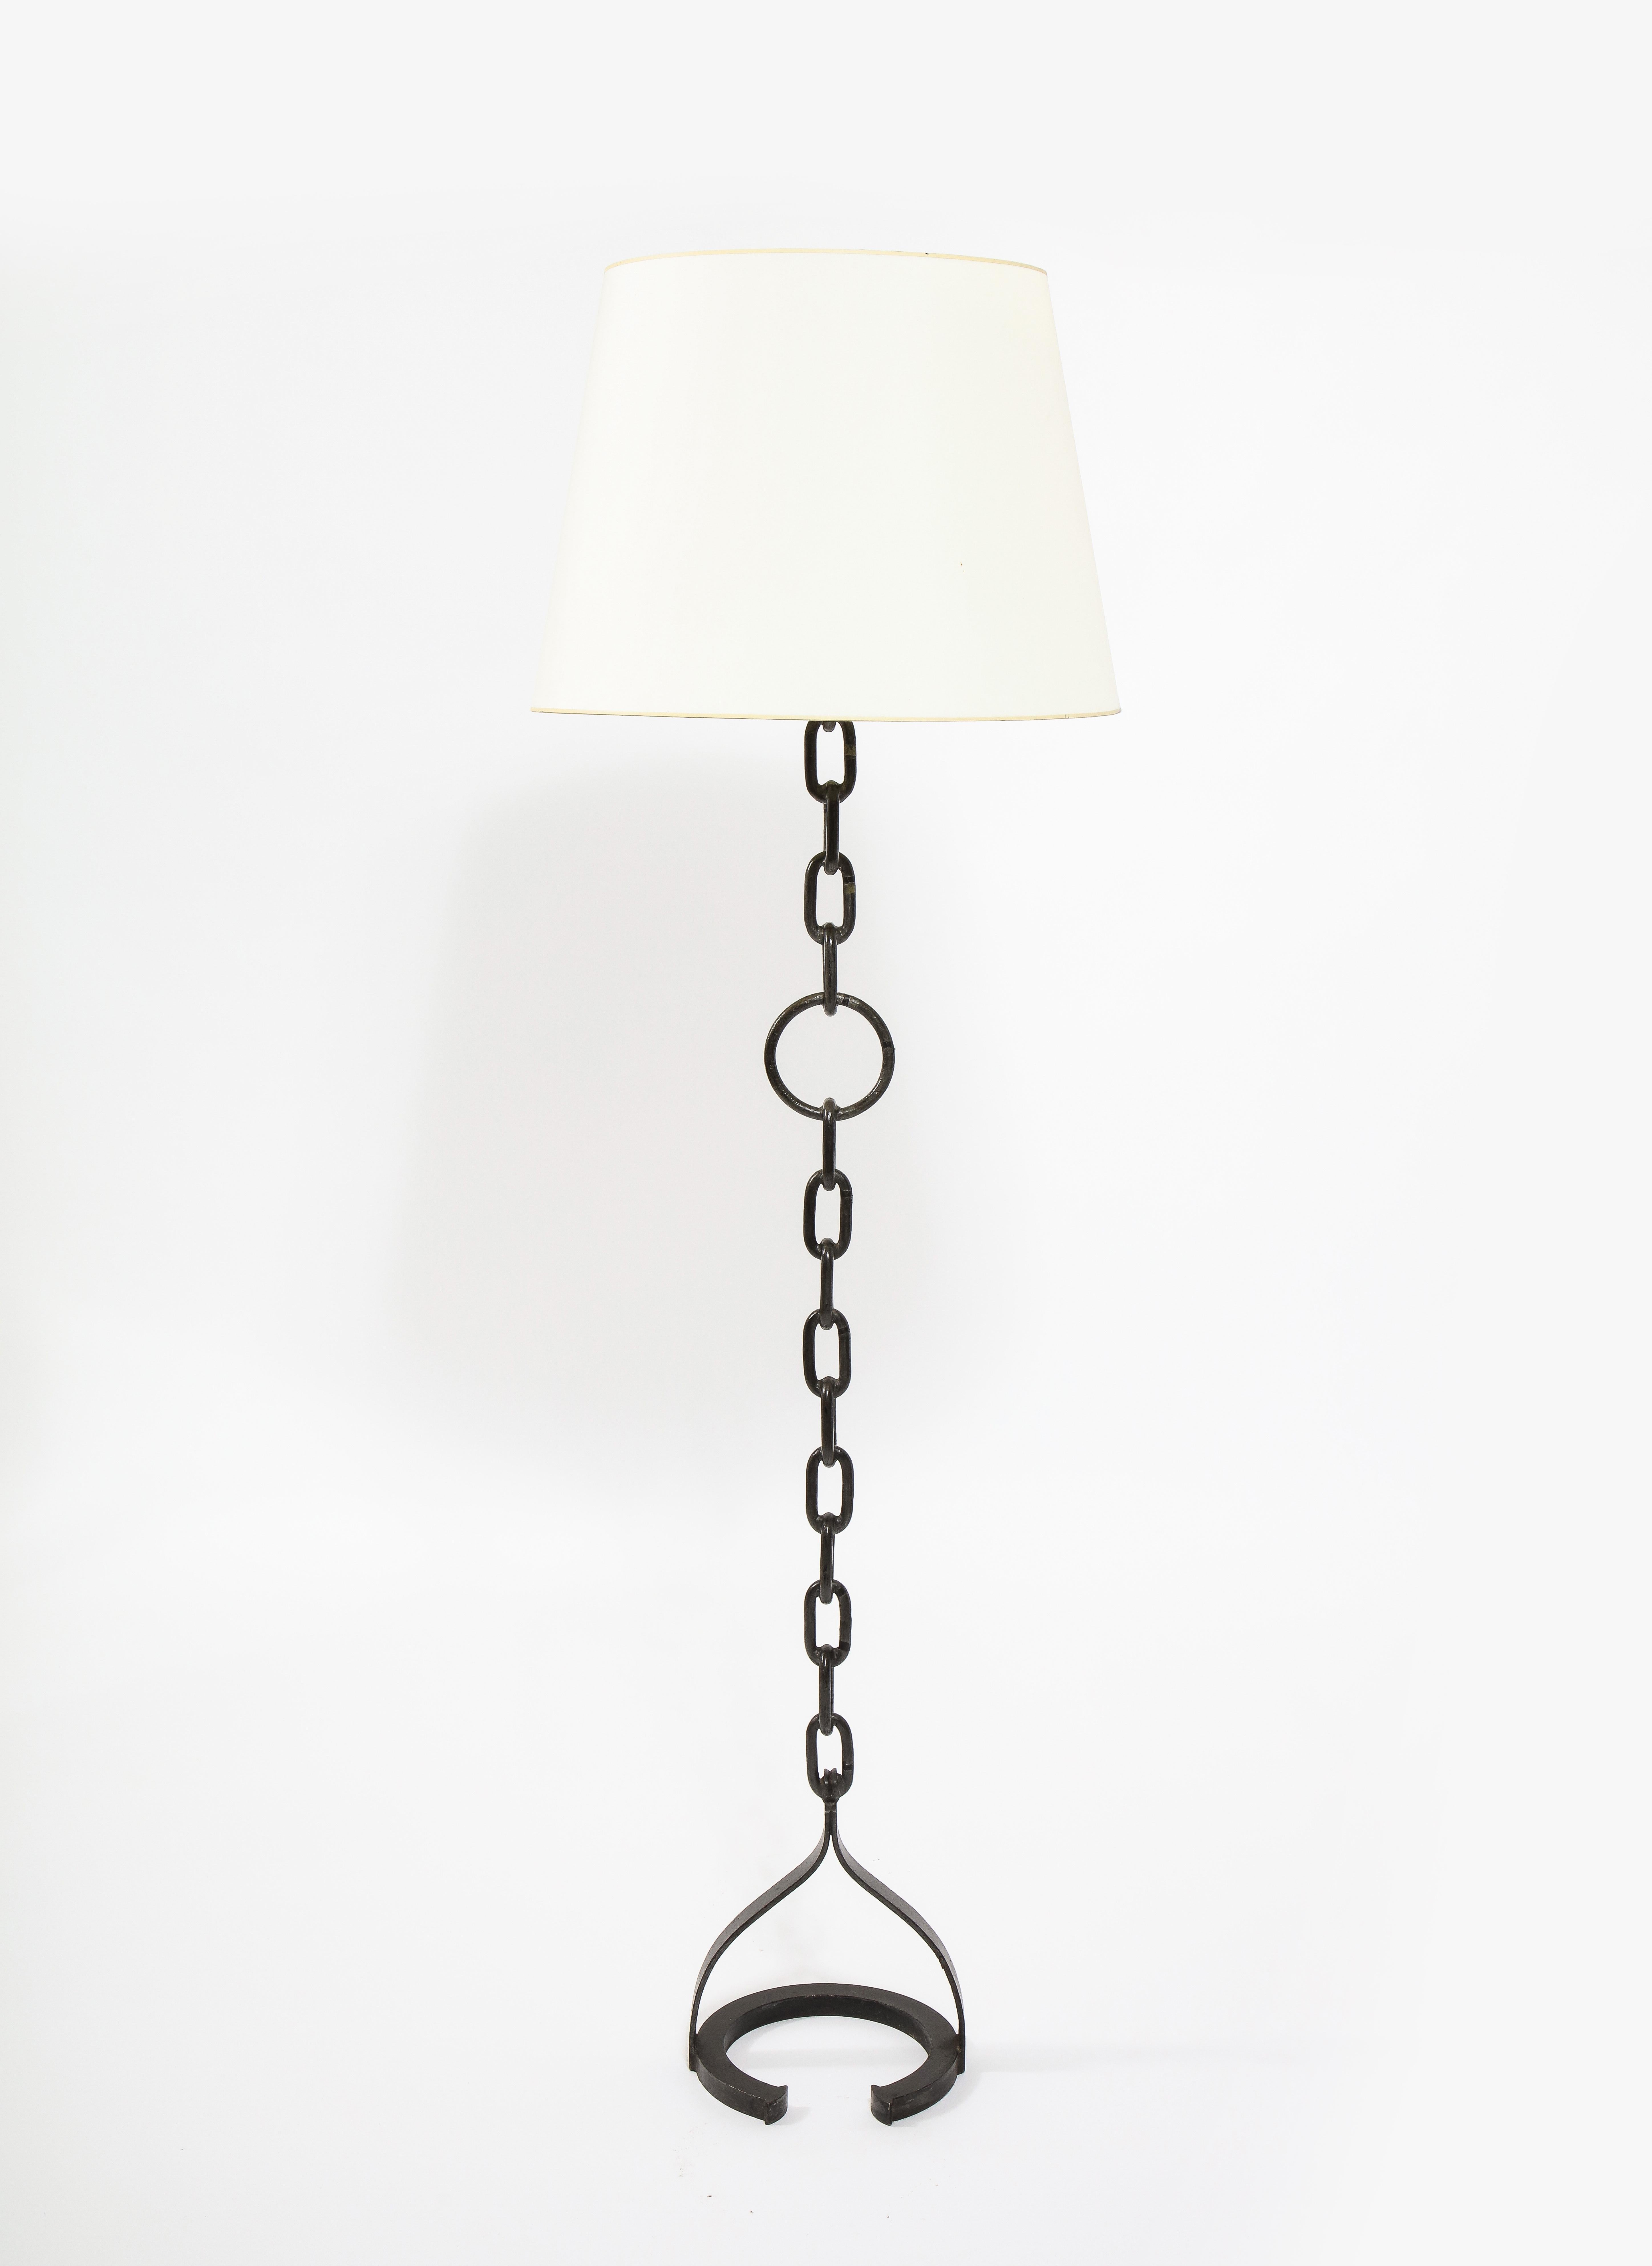 Elegant wrought iron standing lamp made of welded chain links with a large ring in the center resting on a half-round base. Shade is not included. 

Also available, table lamp version of same.